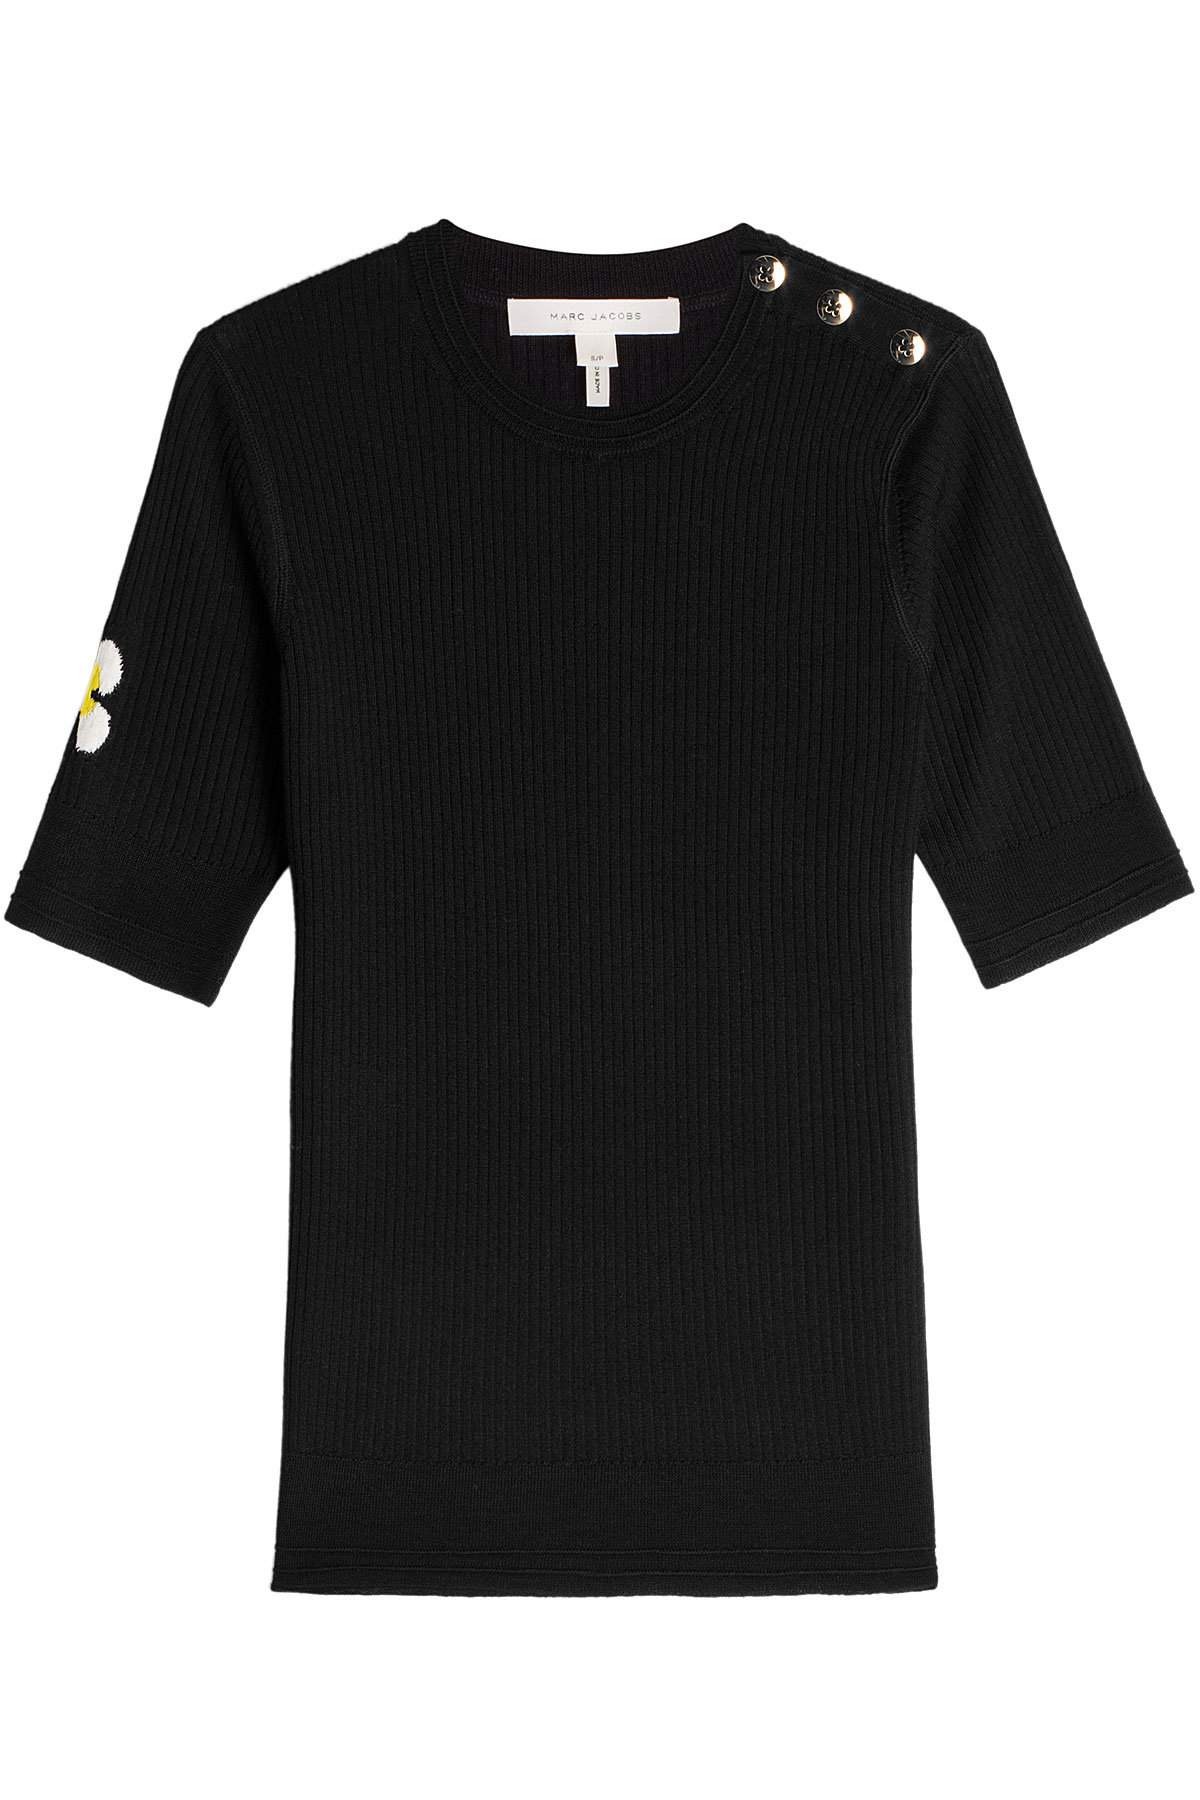 Merino Wool Top with Embossed Buttons by Marc Jacobs